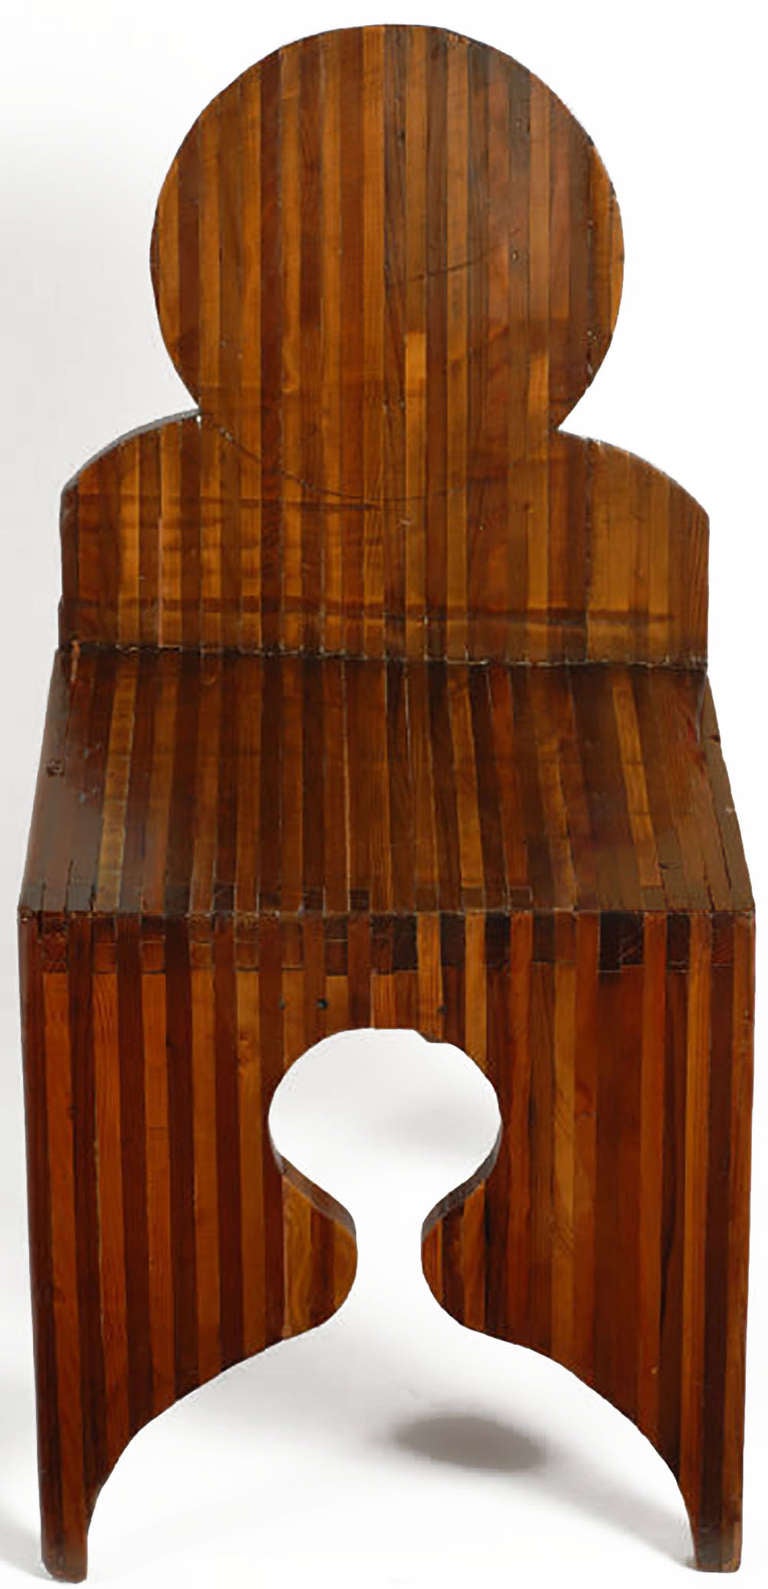 Consisting of lighter and darker woods laminated together for strength and geometry, this handmade chair sculpture had to have been a work of art brut. Round seat back echoed in the keyhole cut-out of the front and back bases.